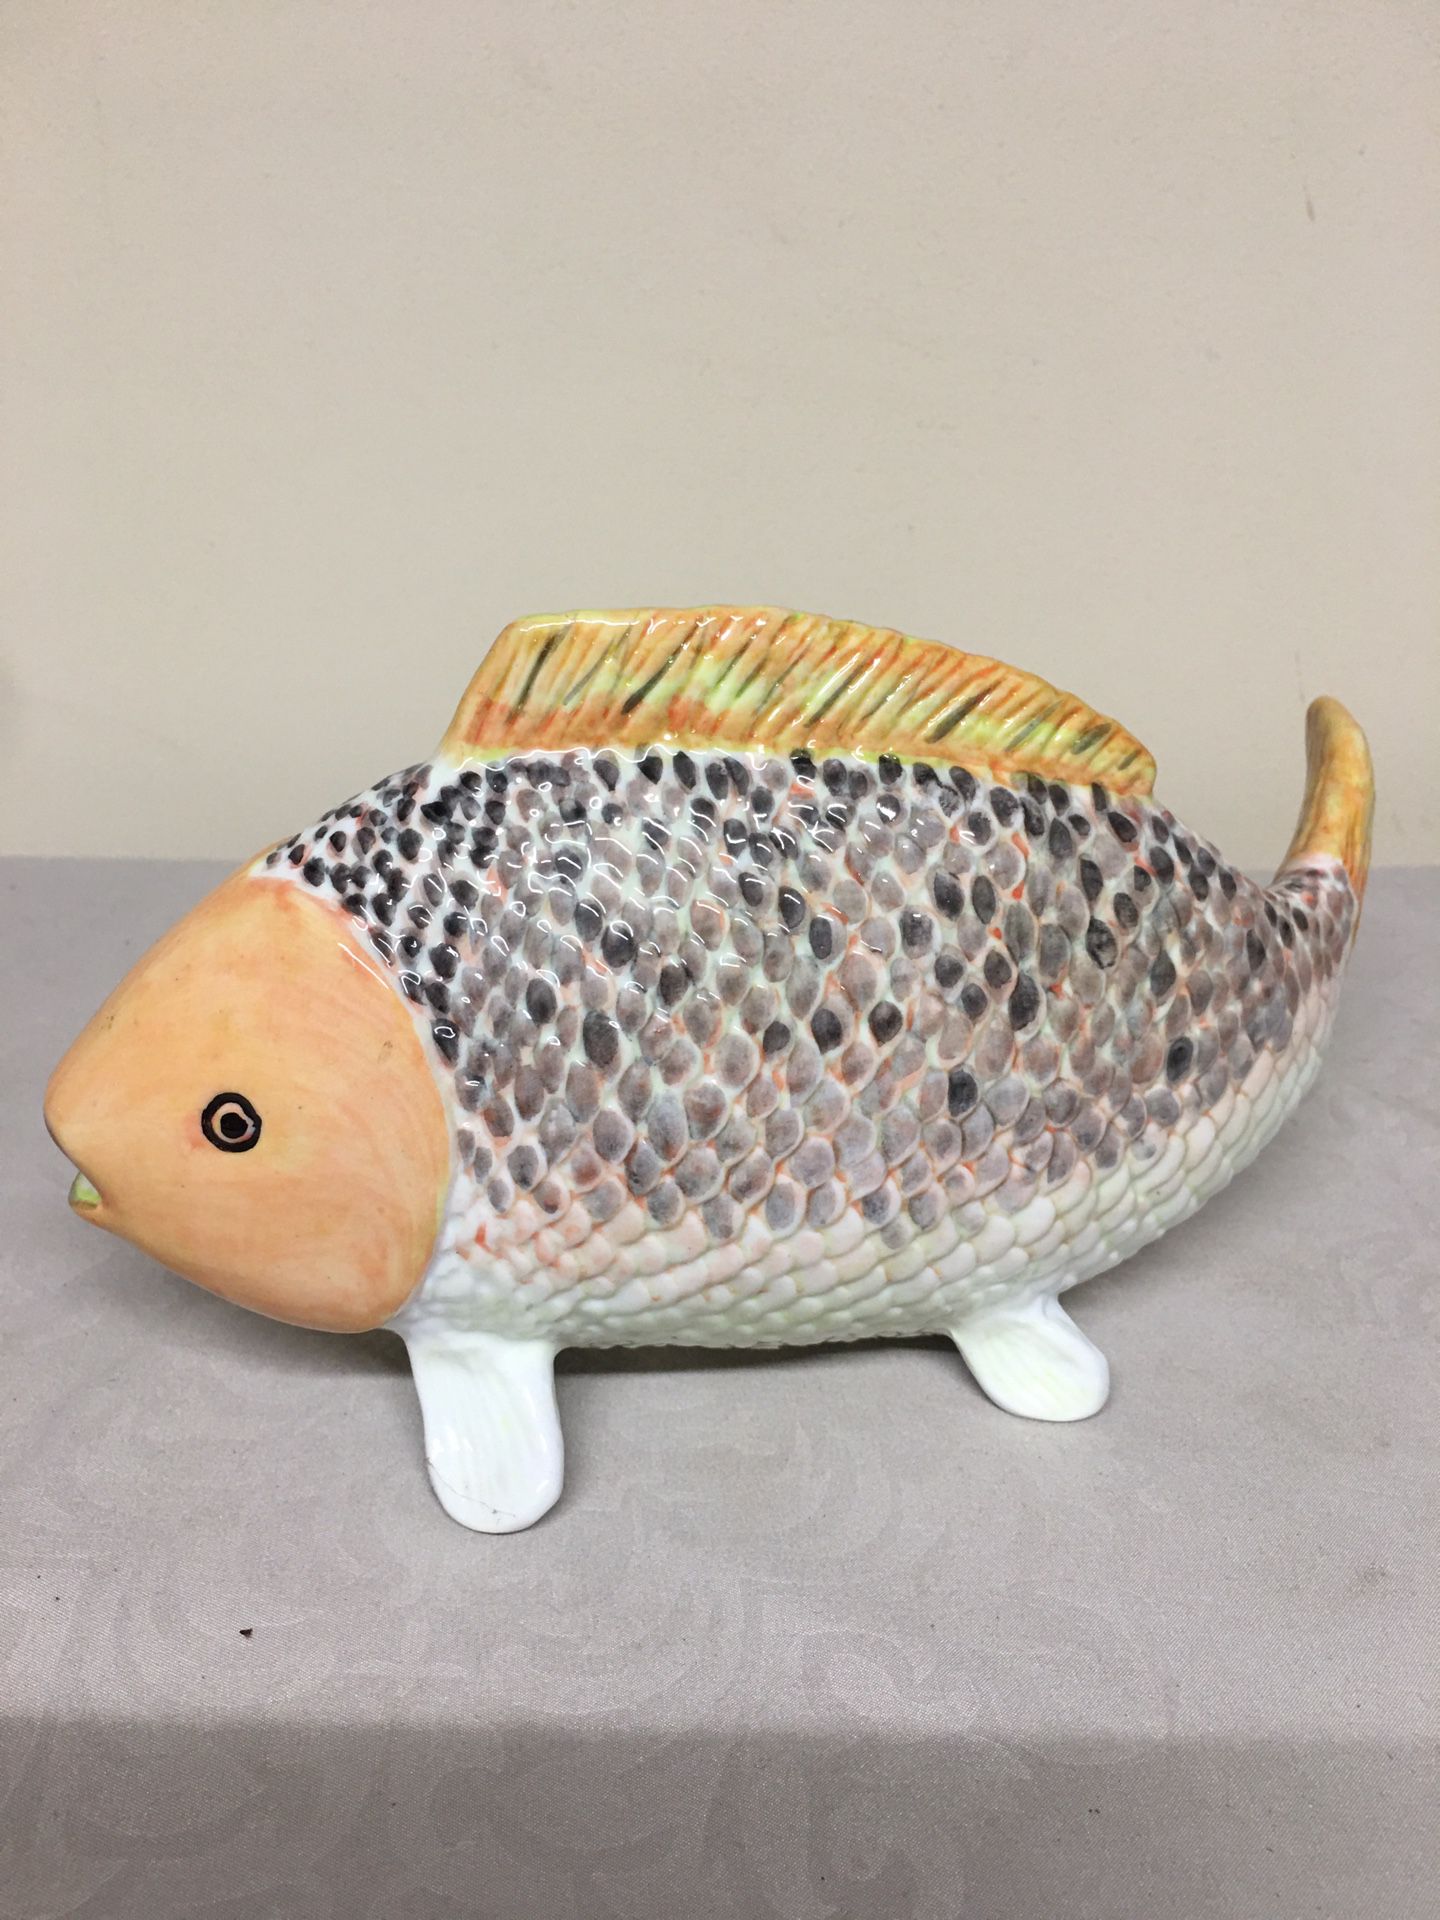 Fish Tank Decor & Fish/Dolphin Sculptures Decor • See All Photos (All 5 Items For $20)